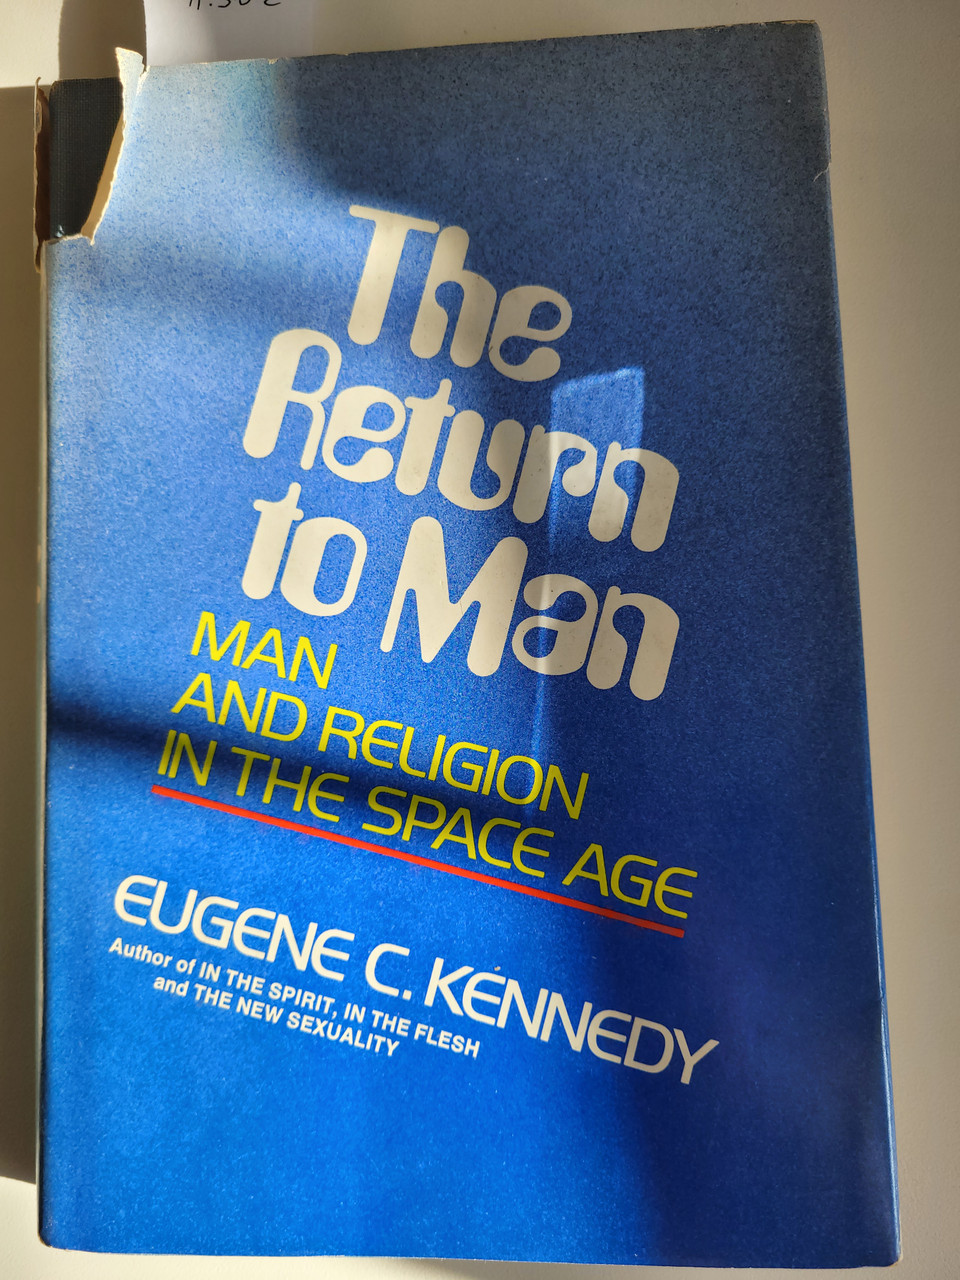 The Return to Man Man and Religion in the Space Age by Eugene Kennedy